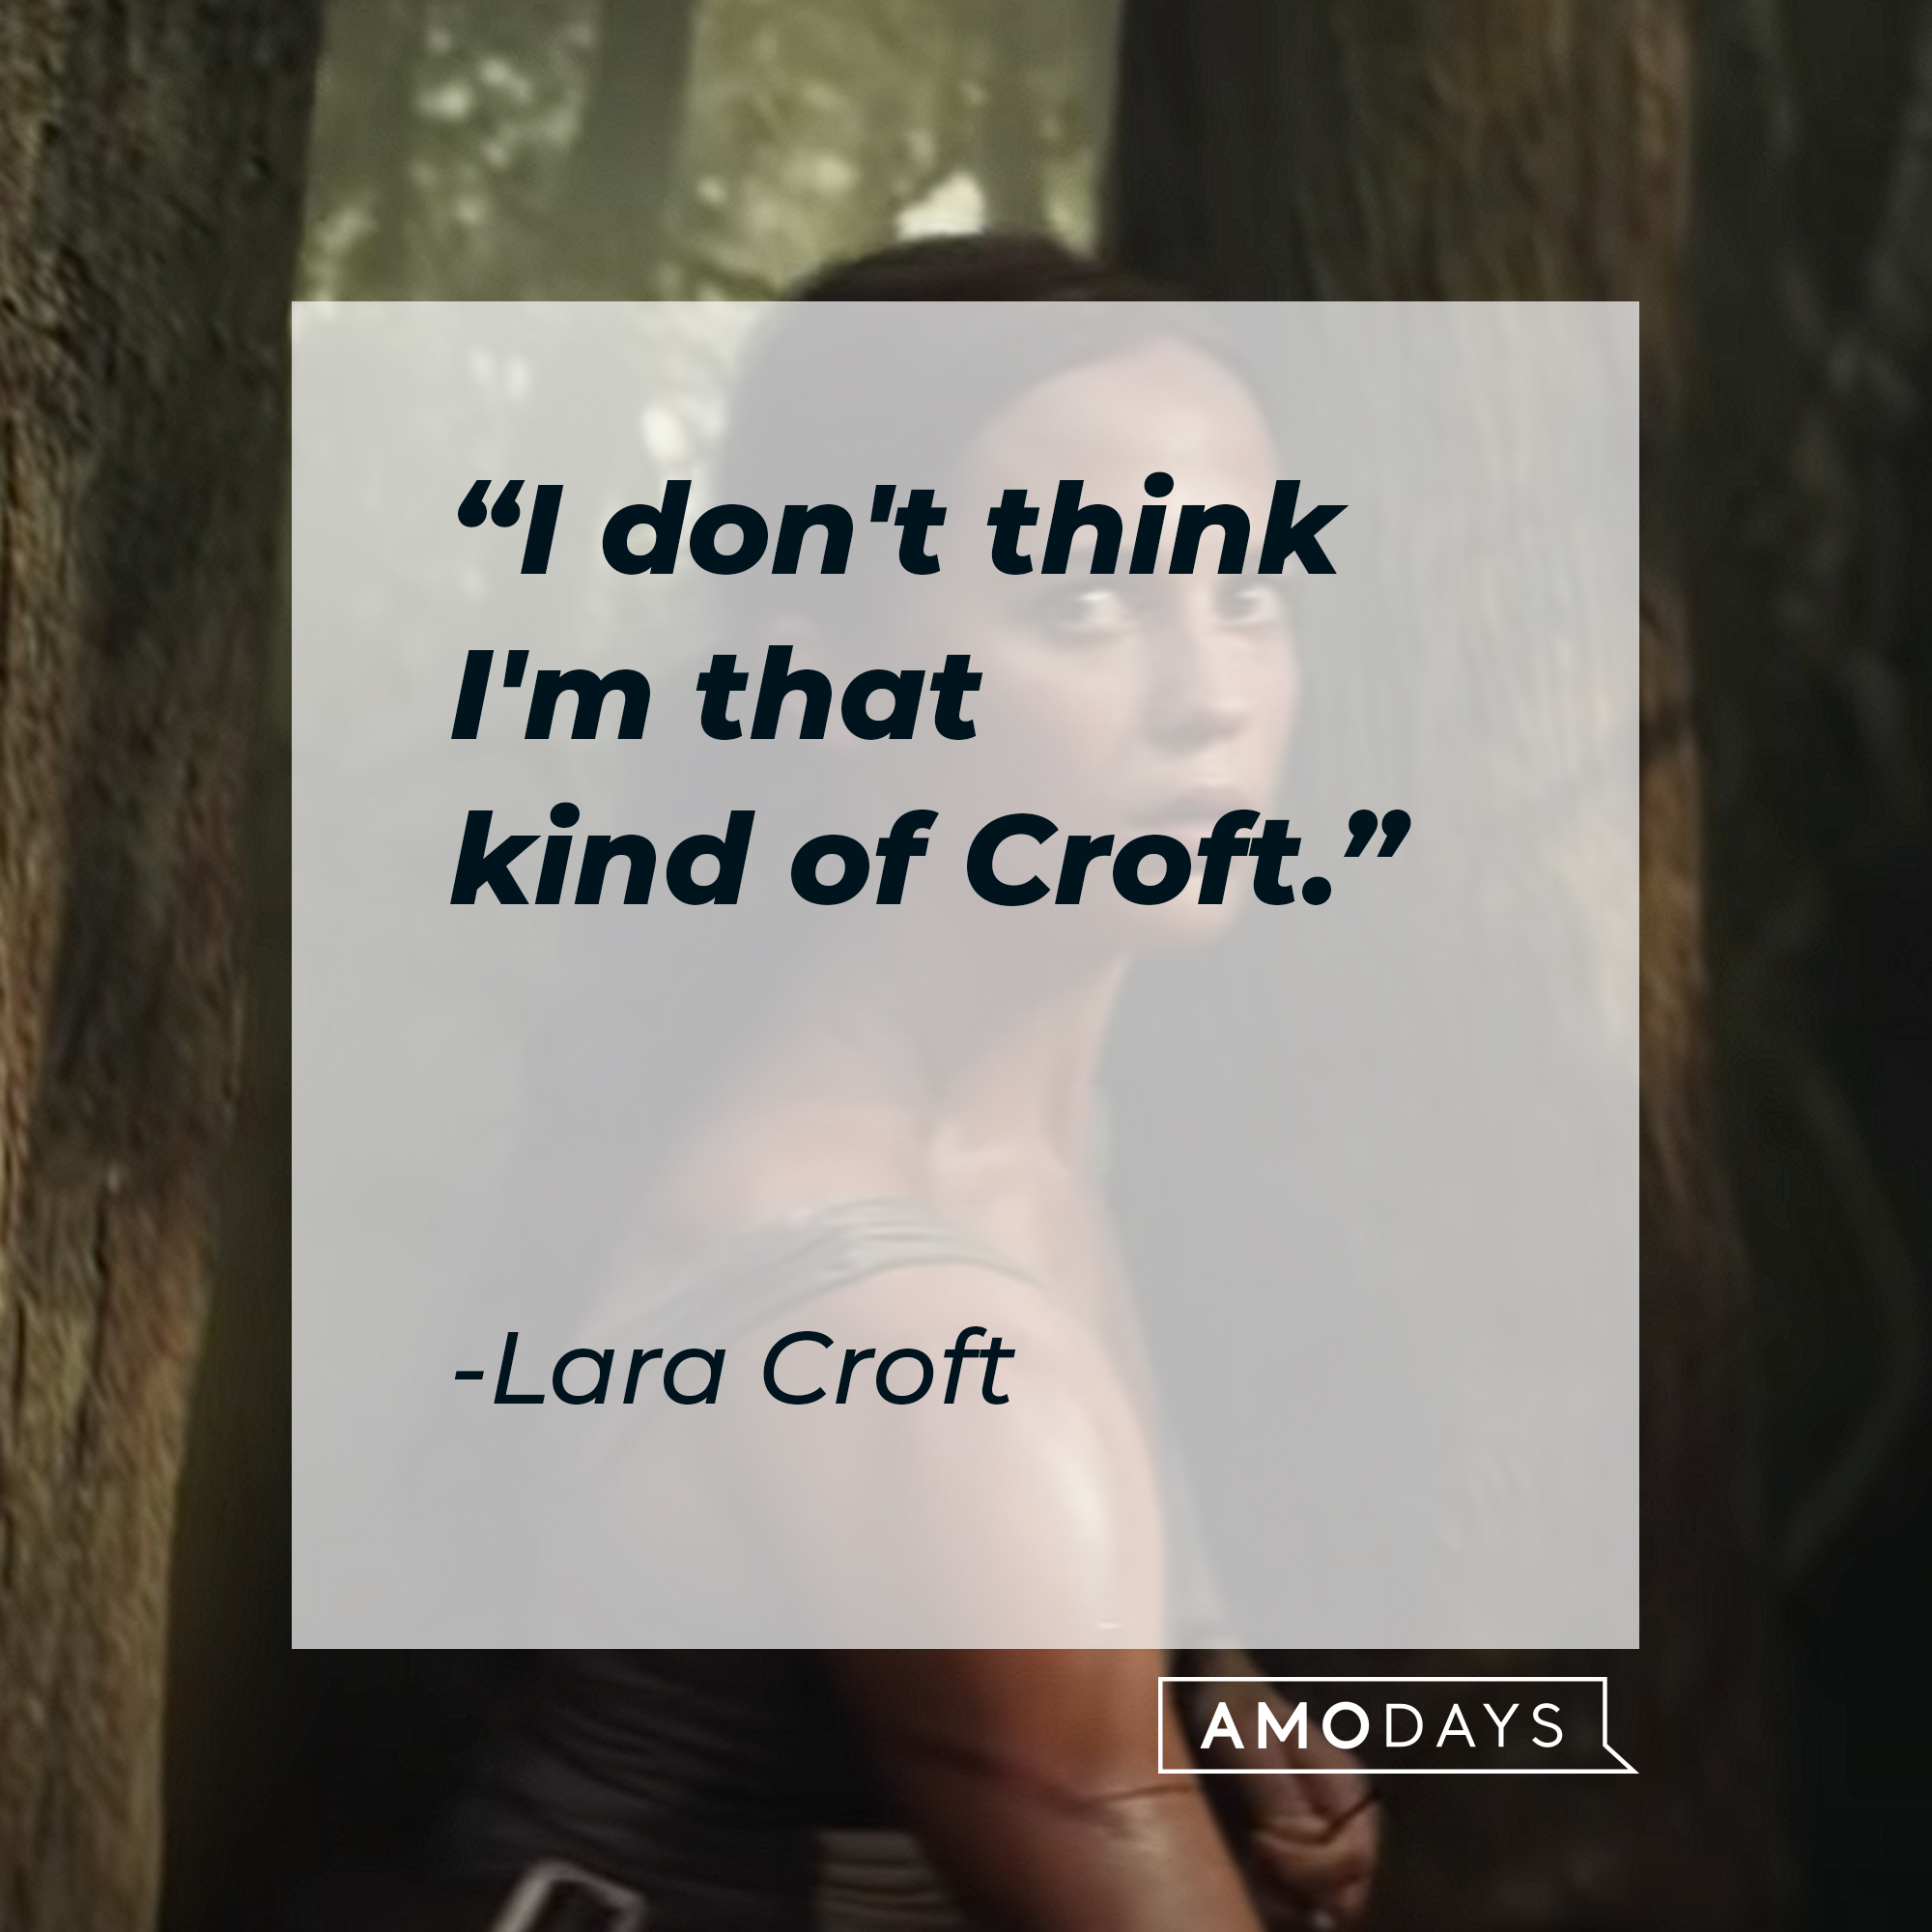 An image of  the Lara Croft played by Alicia Vikander, with the Lara Croft quote: “I don't think I'm that kind of Croft.” | Source: youtube.com/WarnerBrosPictures